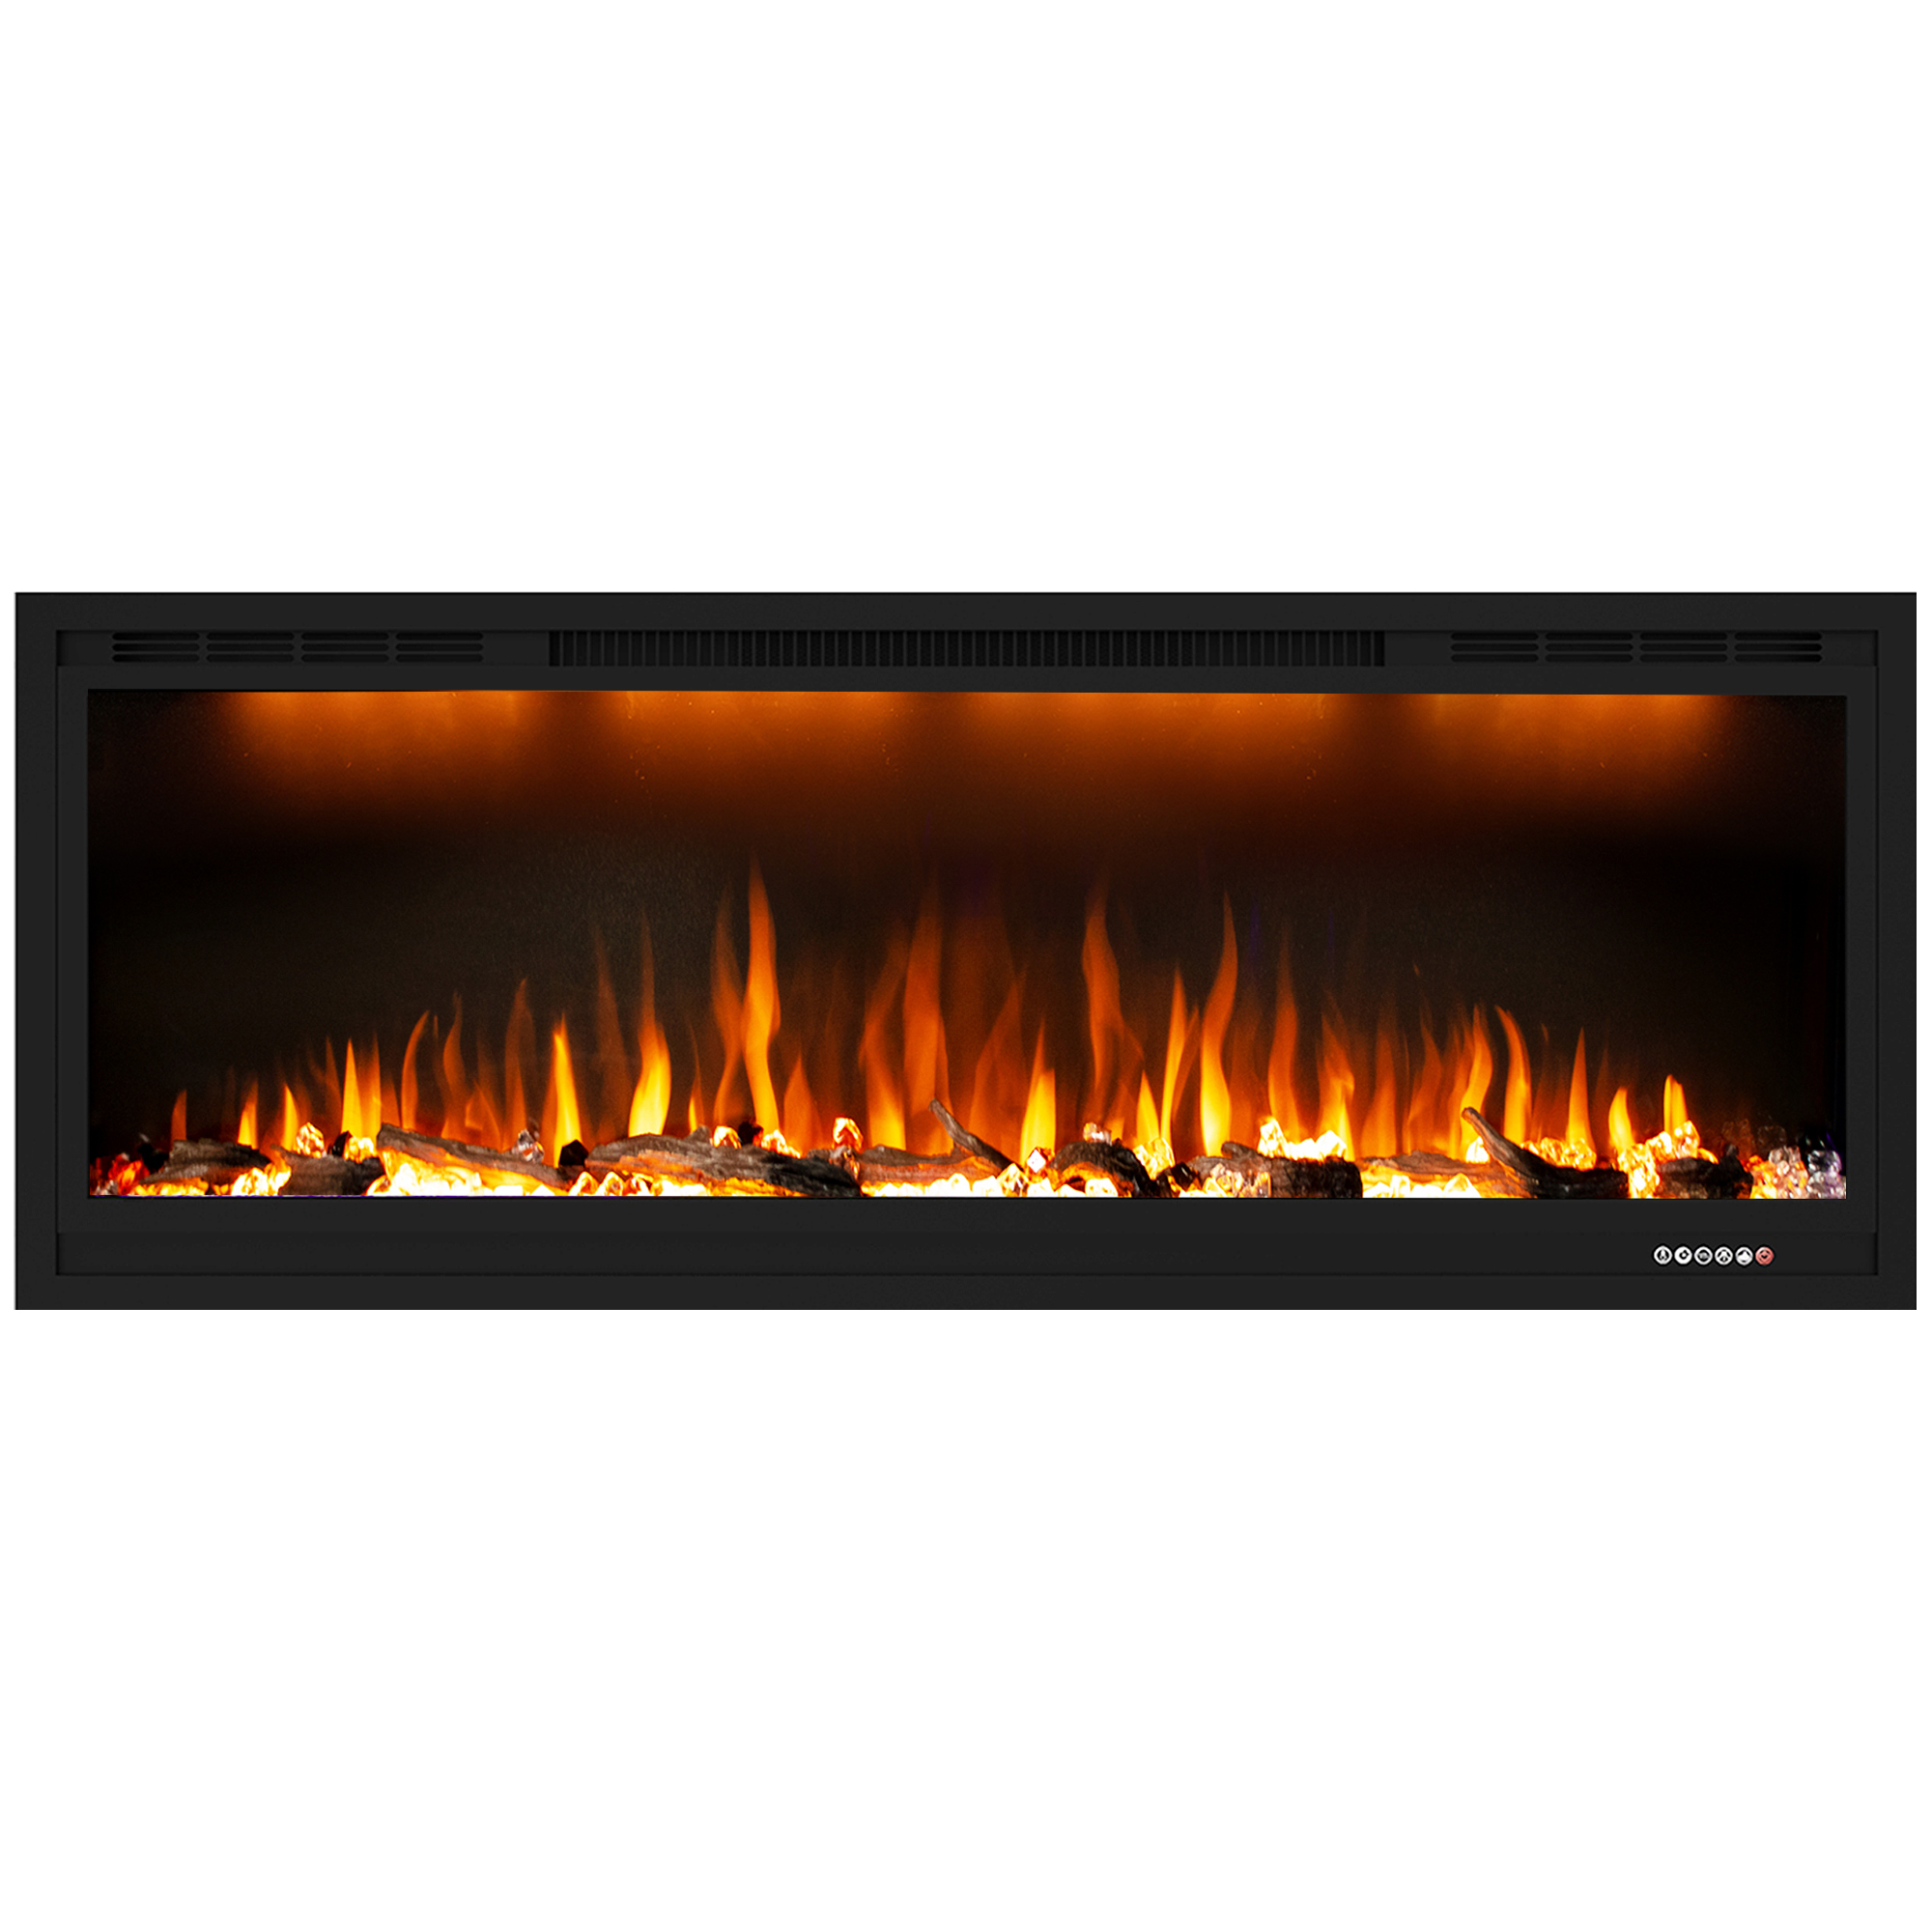 Valuxhome Recessed and Wall Mounted Electirc Fireplace with Realistic Visual Effect 